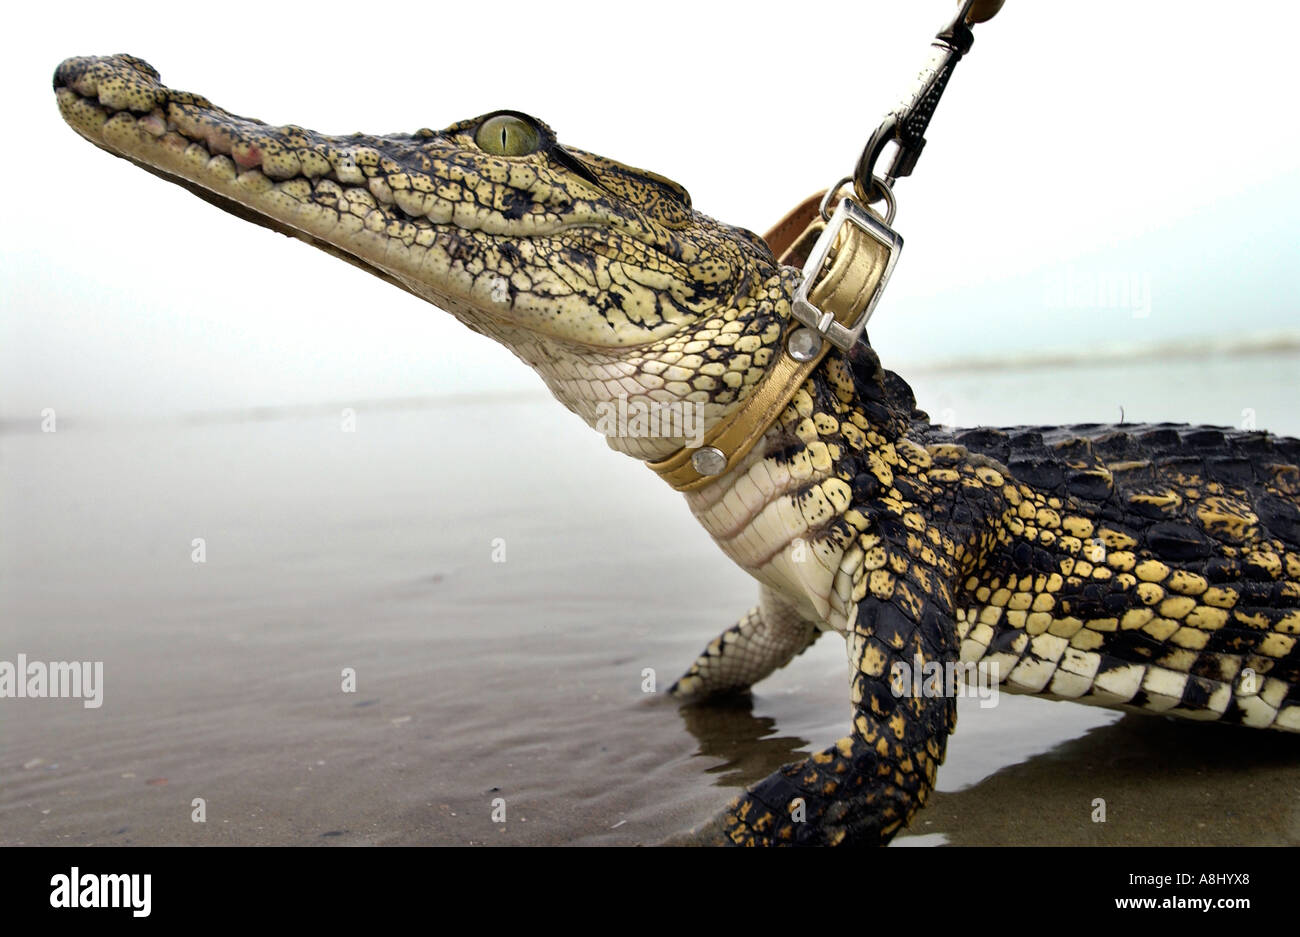 A baby crocodile called Aswas on the beach at Brighton during the  shooting of a commercial for dog leads Stock Photo